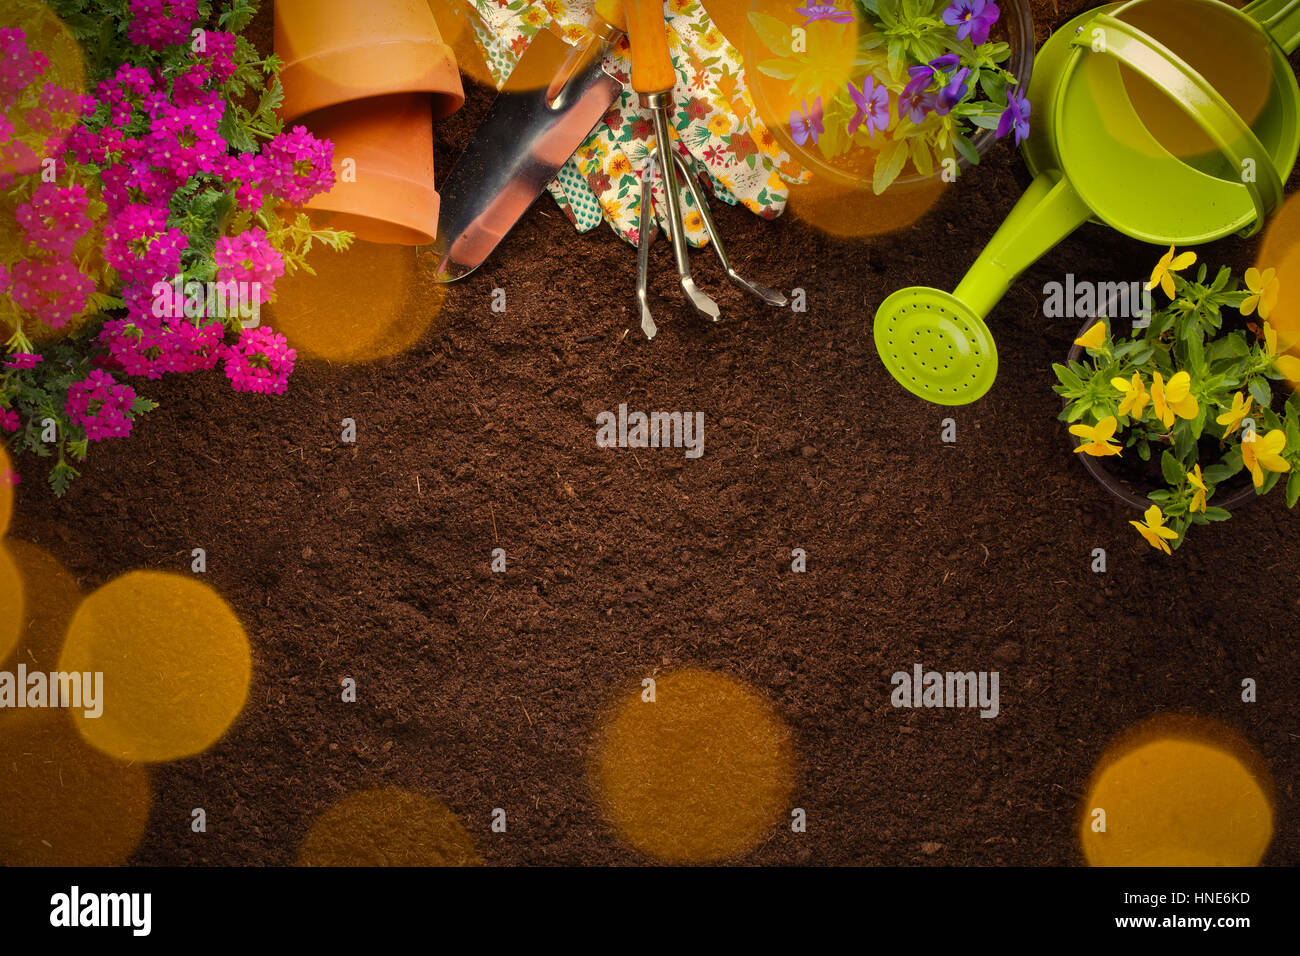 Garden tools, flowers and seeds on soil Stock Photo